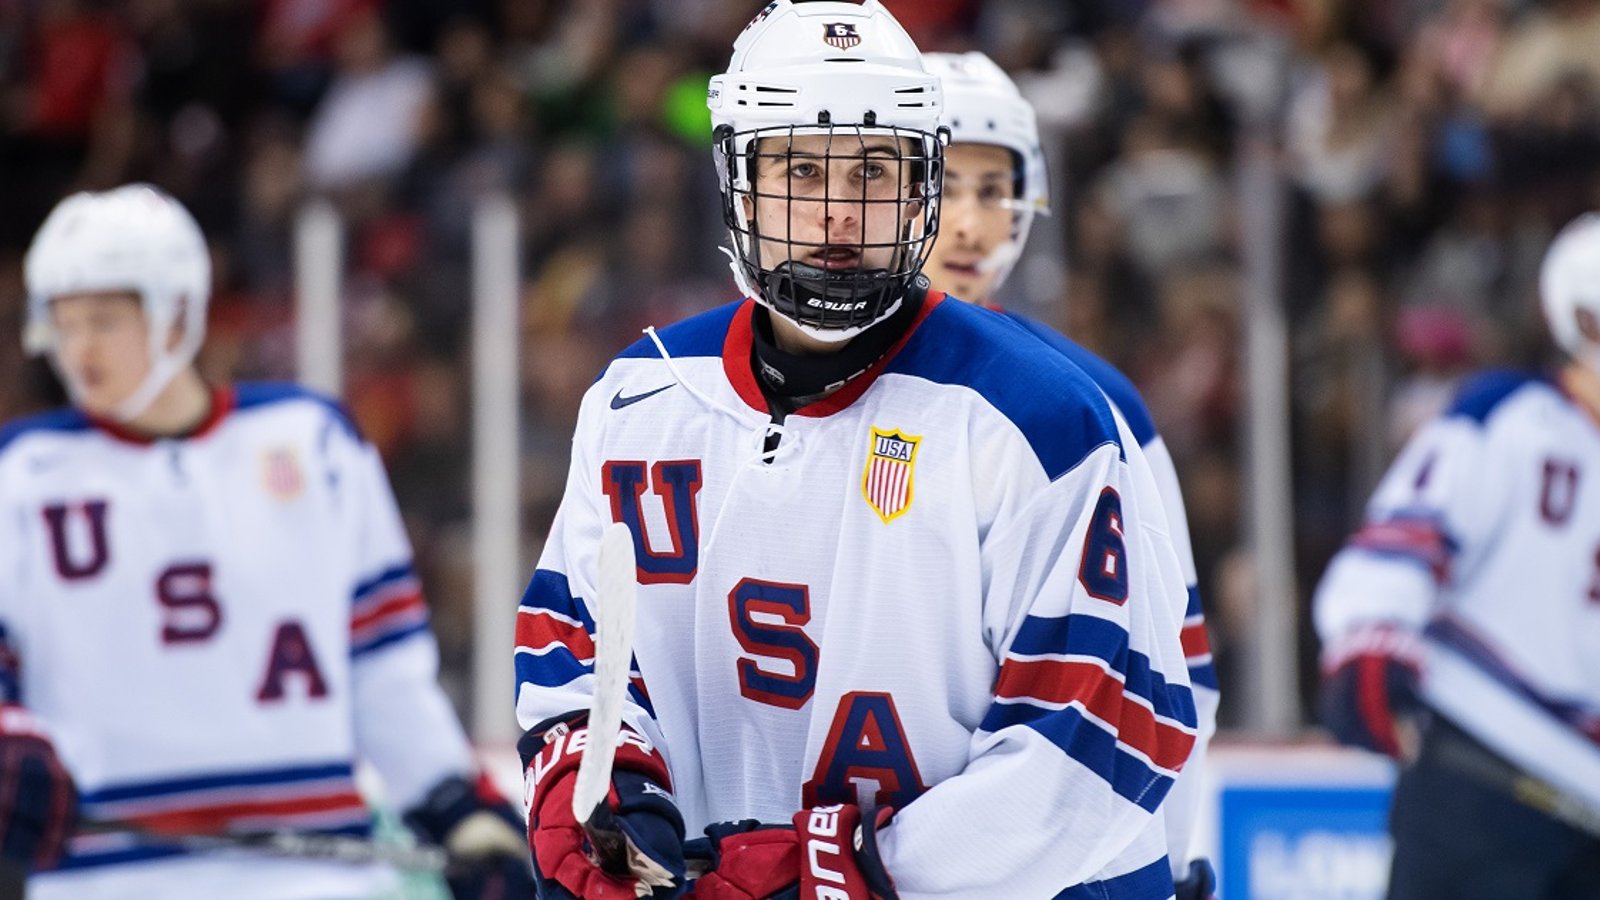 Rumor: Hughes no longer the clear #1 pick at the 2019 NHL draft.